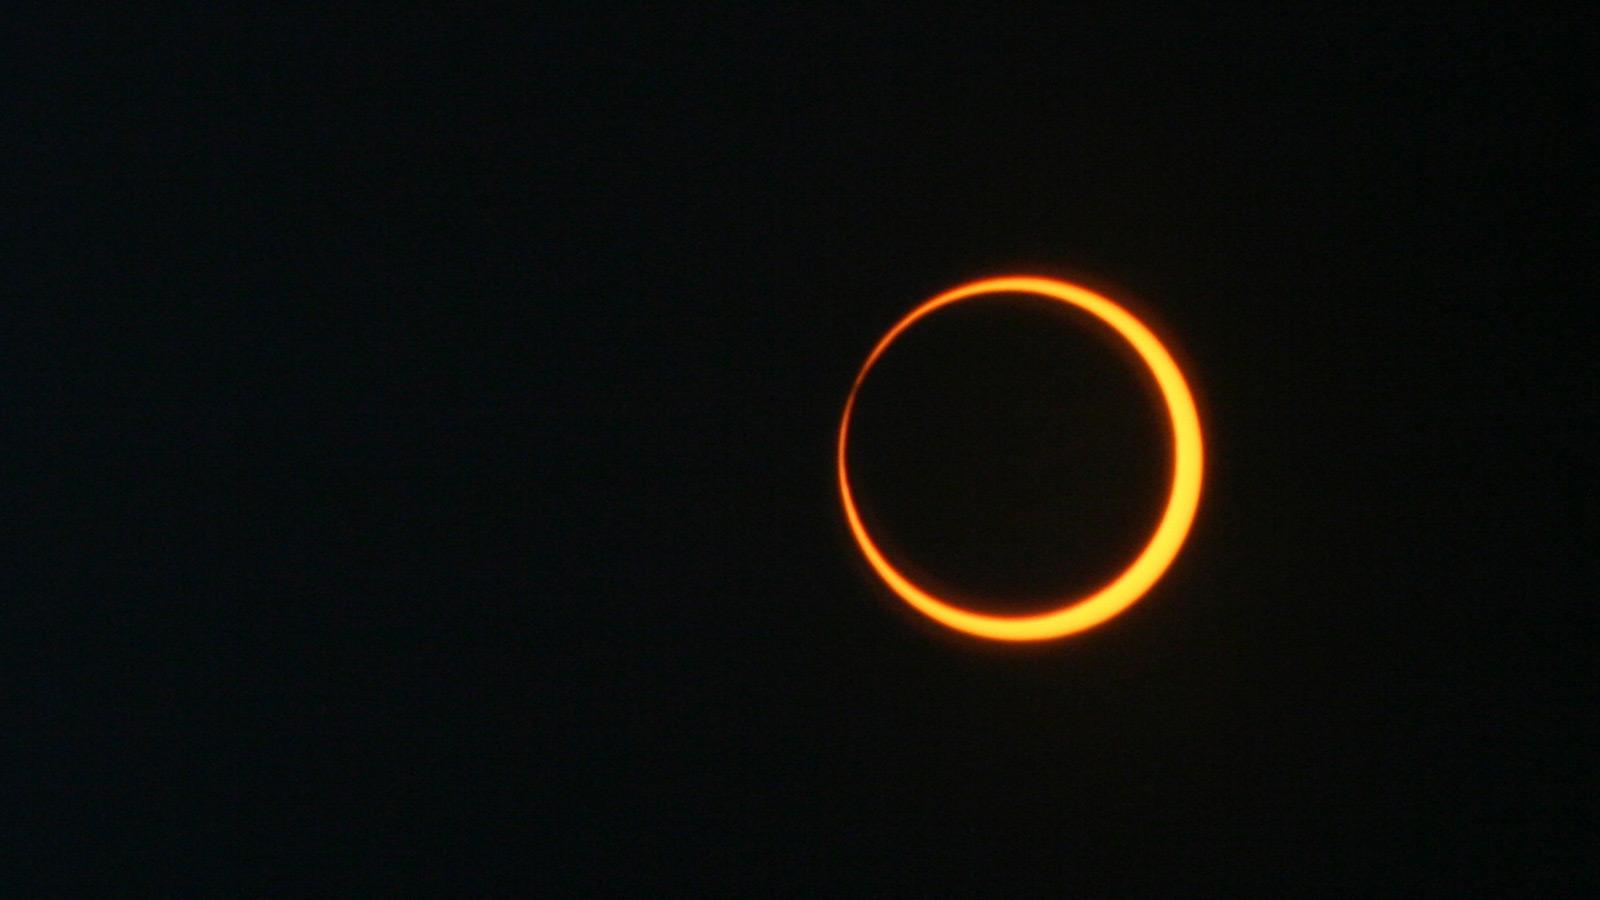 Image of an annular solar eclipse, where the moon moves over the center of the sun to create a ring of fire appearance